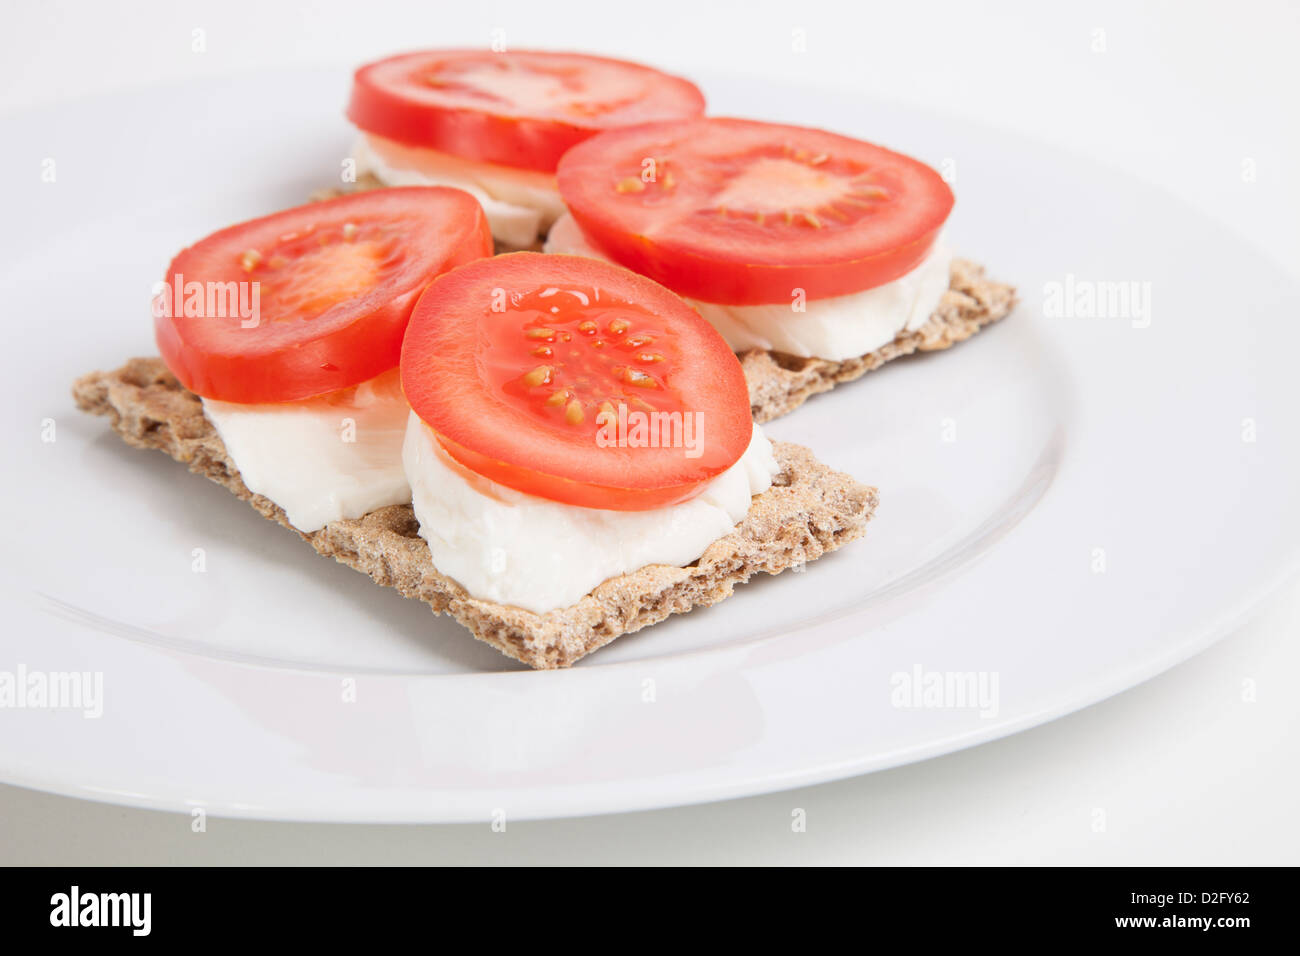 Crispbreads with tomato slices and cheese Stock Photo